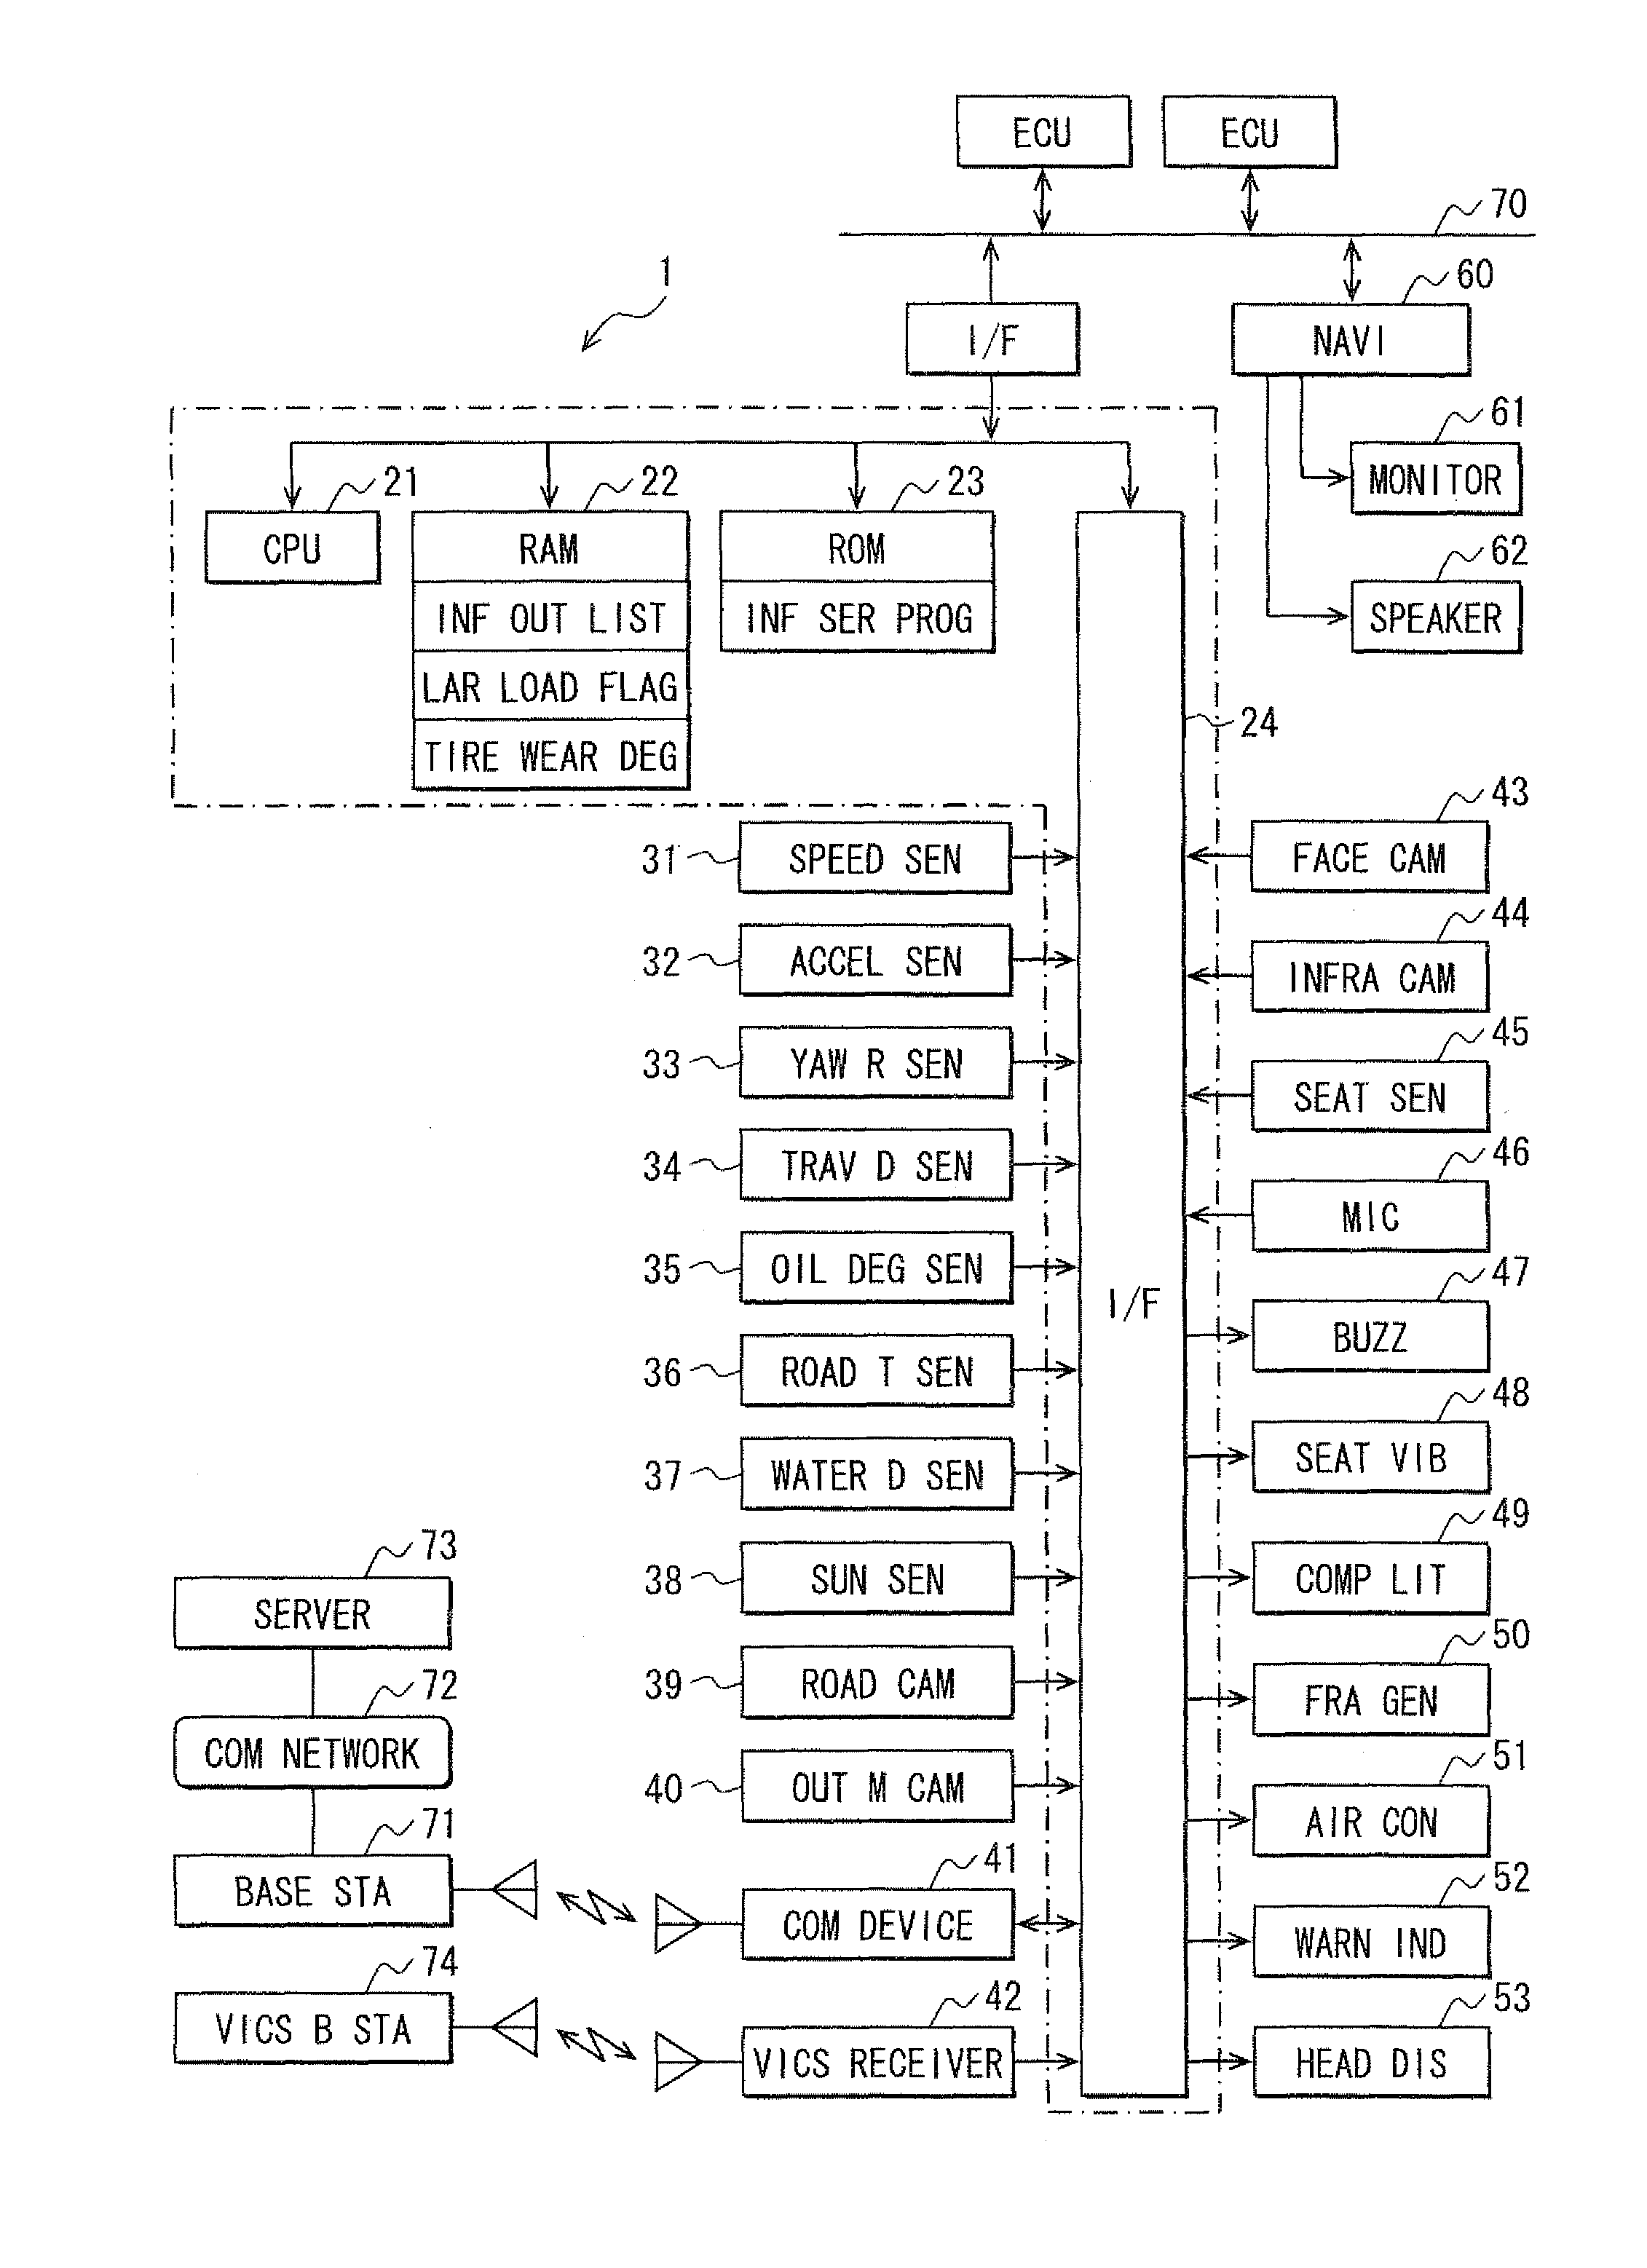 Information service system for vehicle